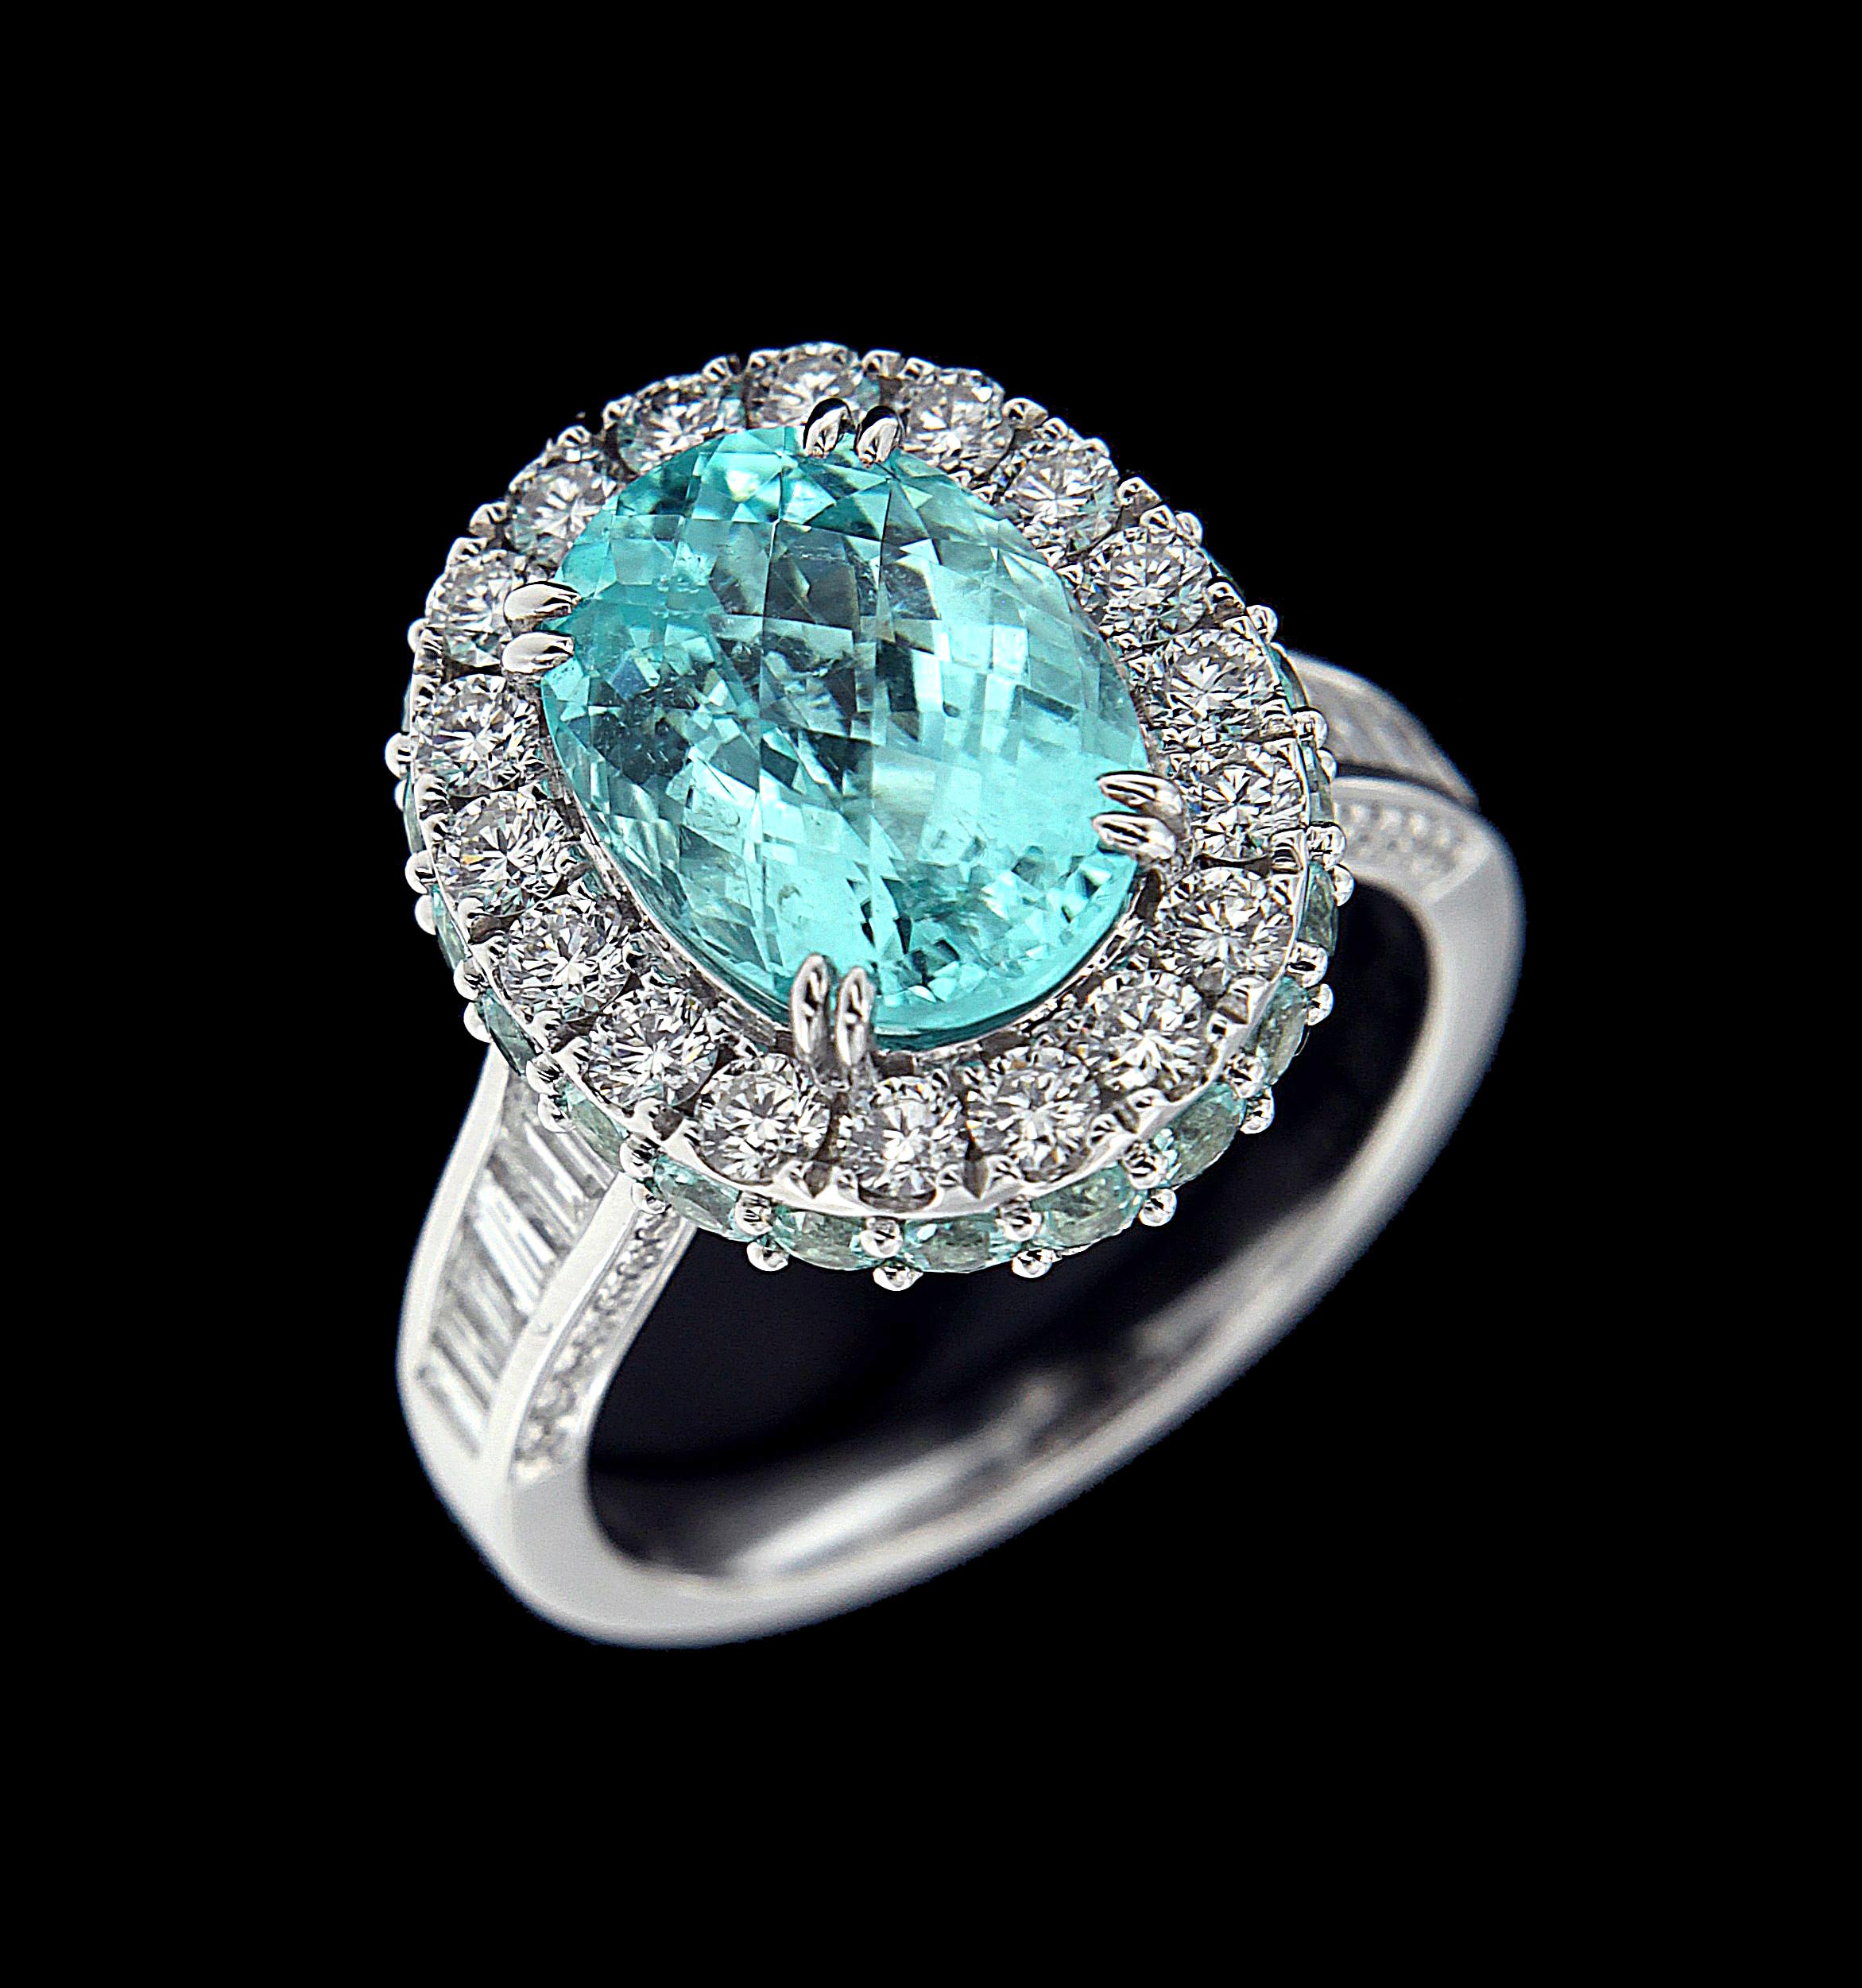 Classic 18 Karat White Gold, Dimond And Paraiba Ring 
Rings:
Diamonds of approximately 1.615 carats, semi-precious stones approximately of 5.270 carats mounted on 18 karat white gold ring. The ring weighs approximately around 9.173 grams.


Please